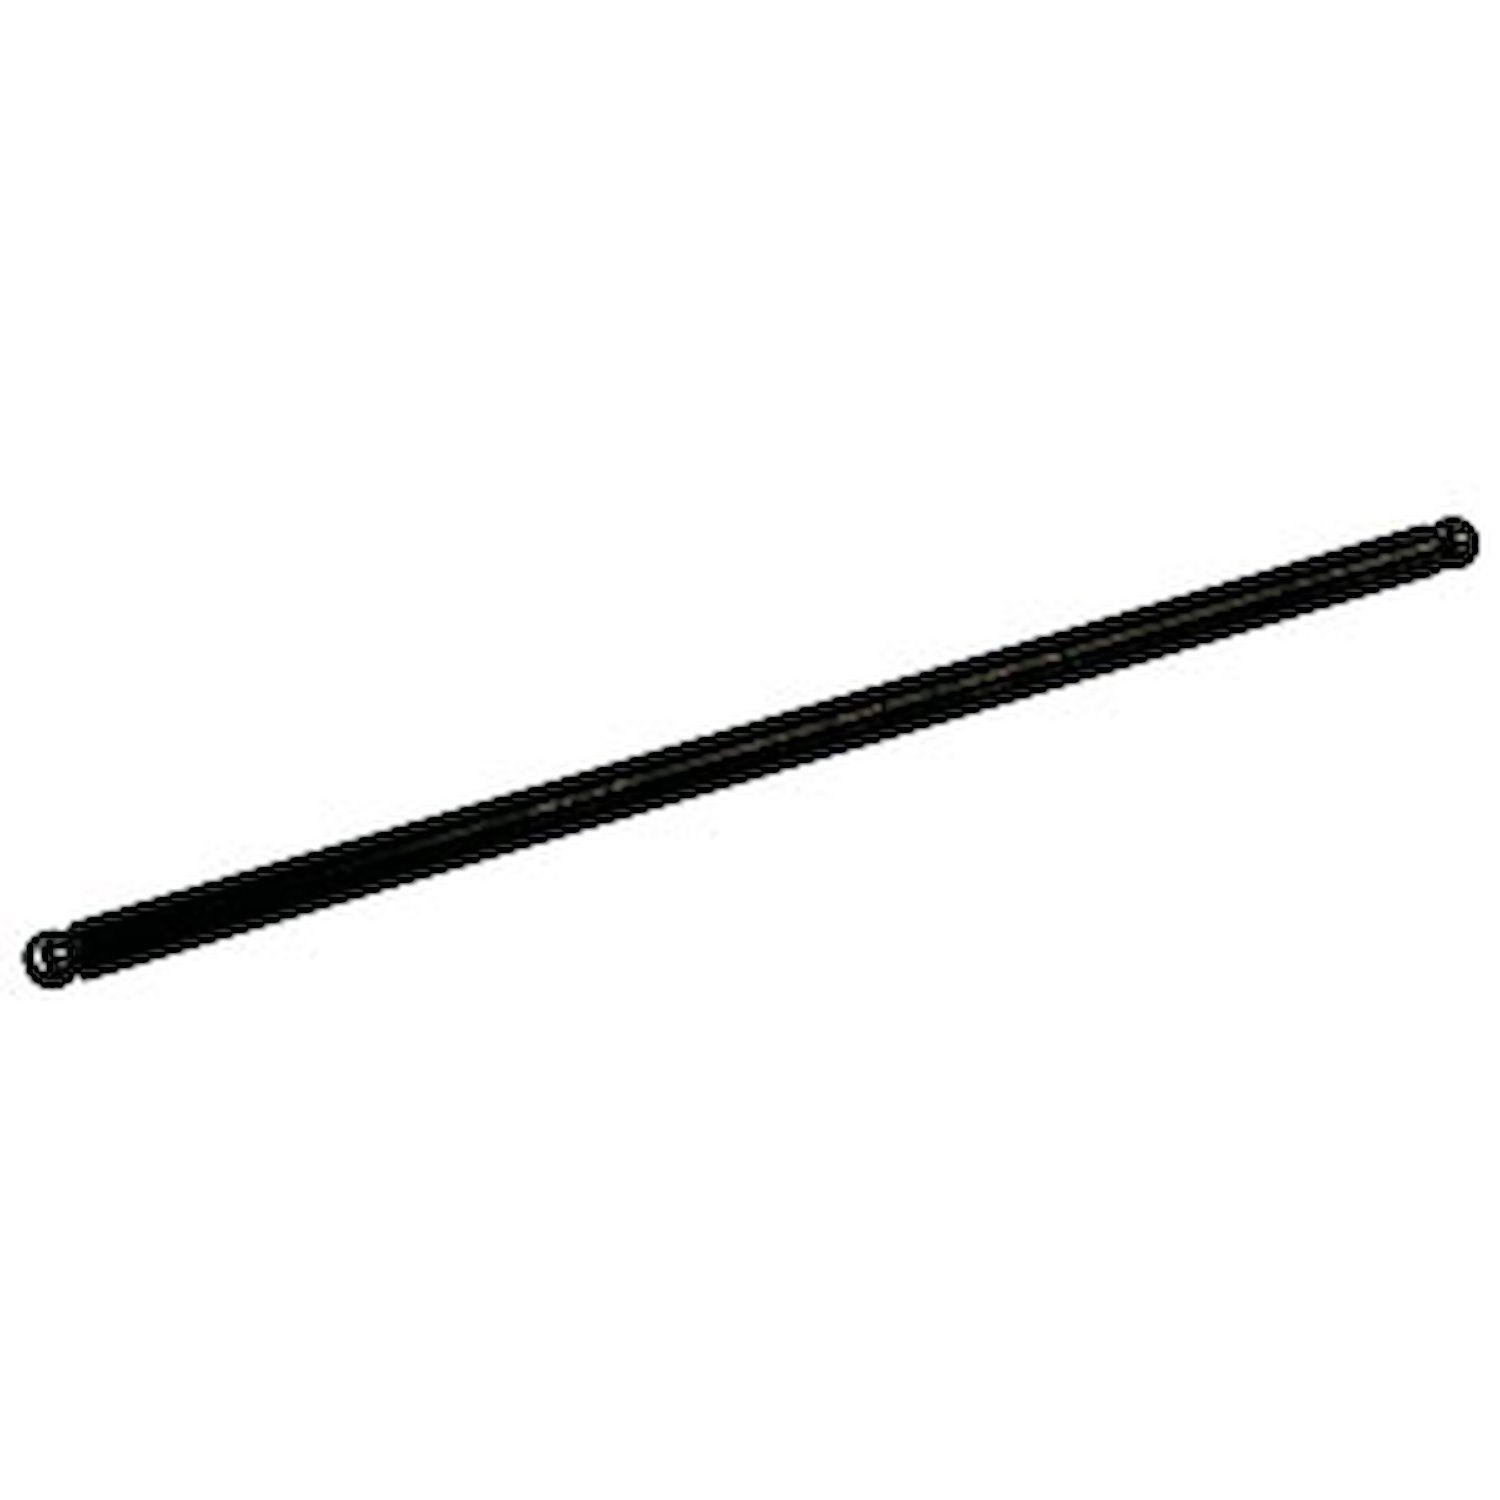 High Performance Pushrod for Small Block Chevy in Stock 7.800" Length